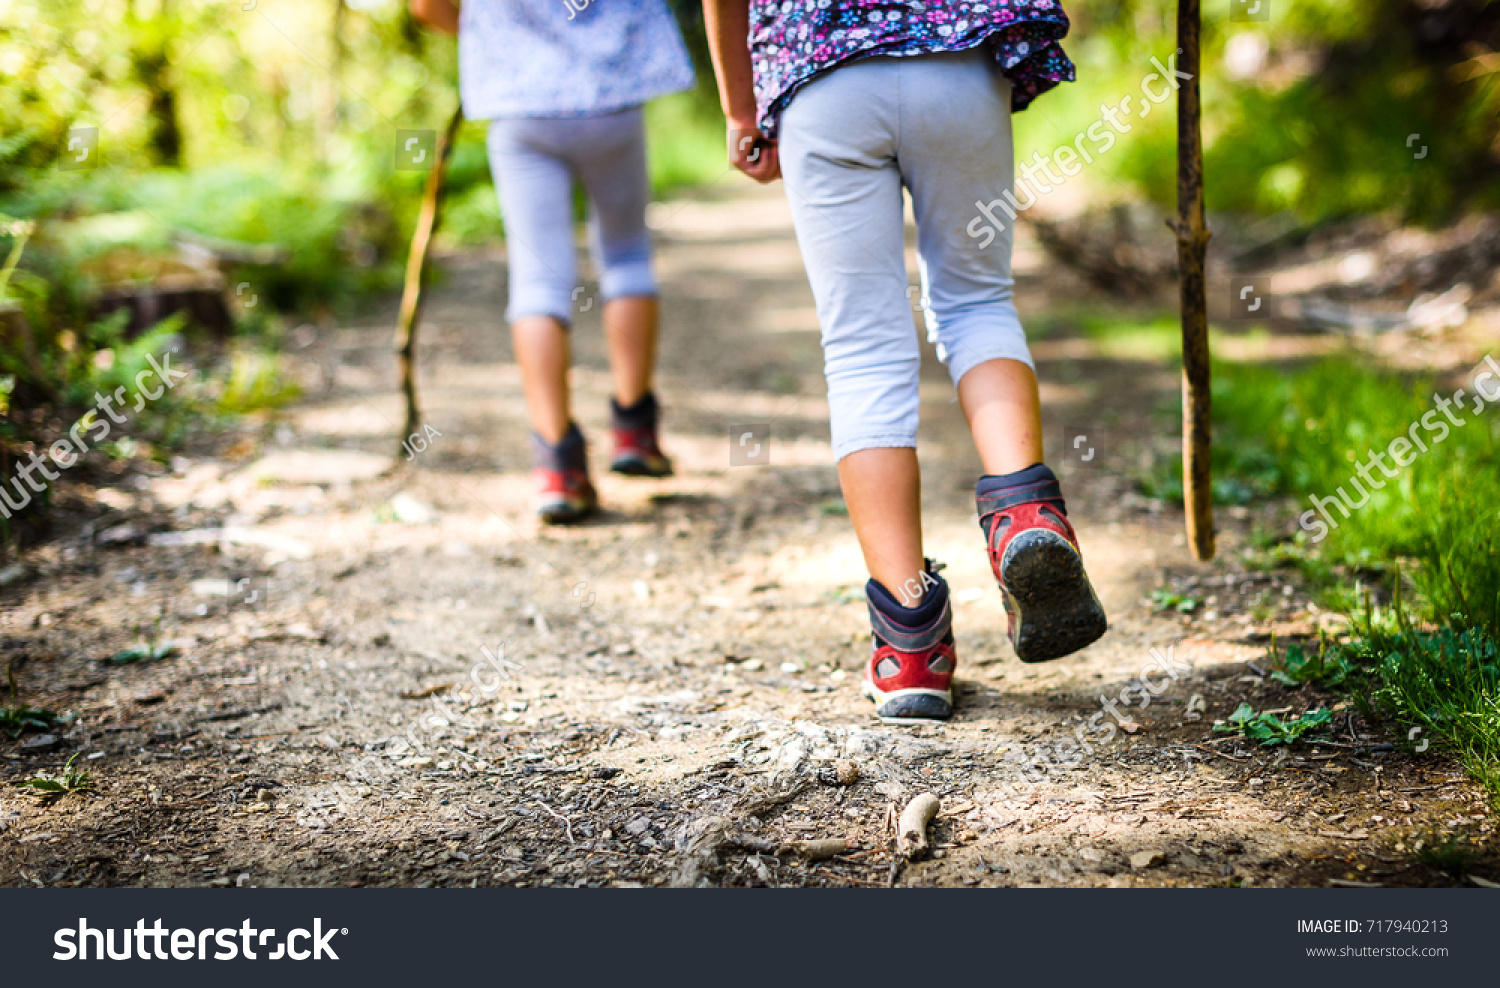 Children hiking in mountains or forest with sport hiking shoes. Girls are walking trough forest path wearing mountain boots and walking sticks. Frog perspective with focus on the shoes. #717940213